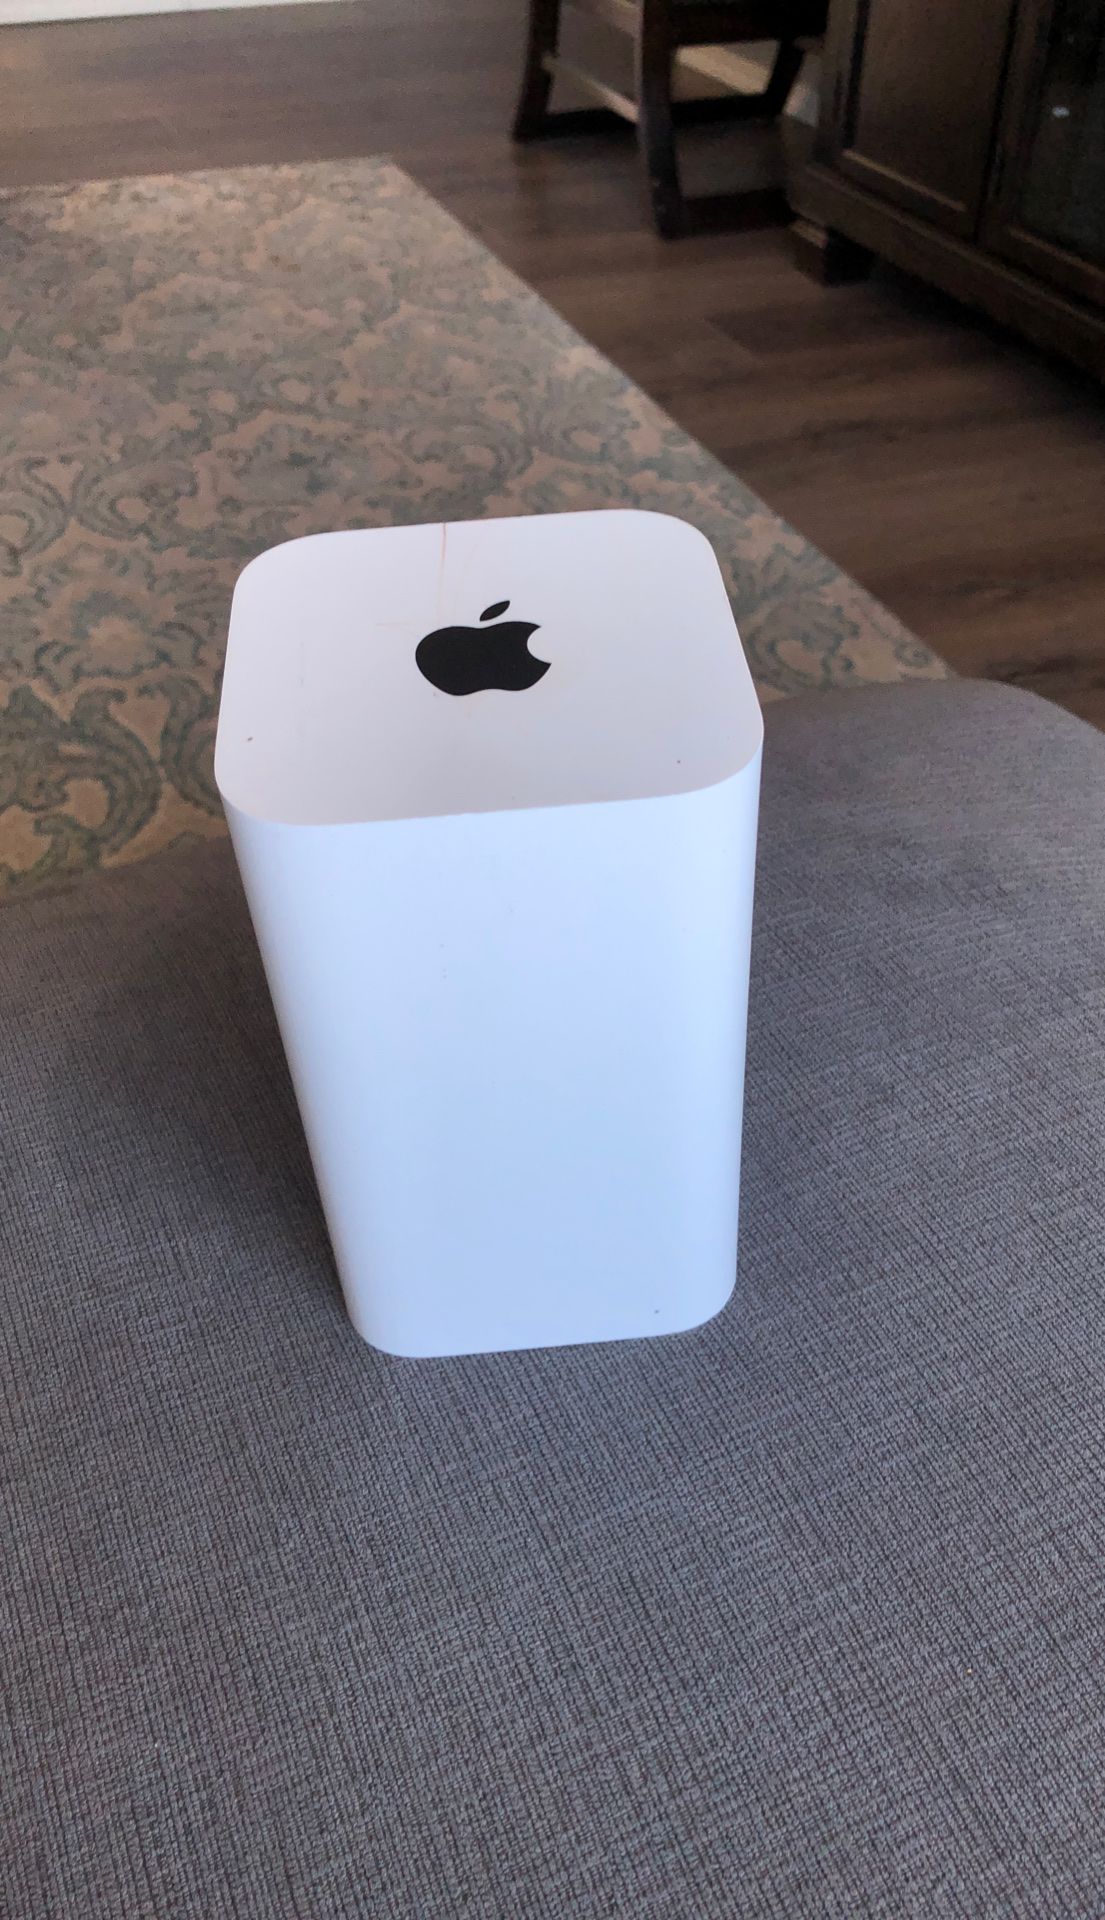 Apple Router A1521